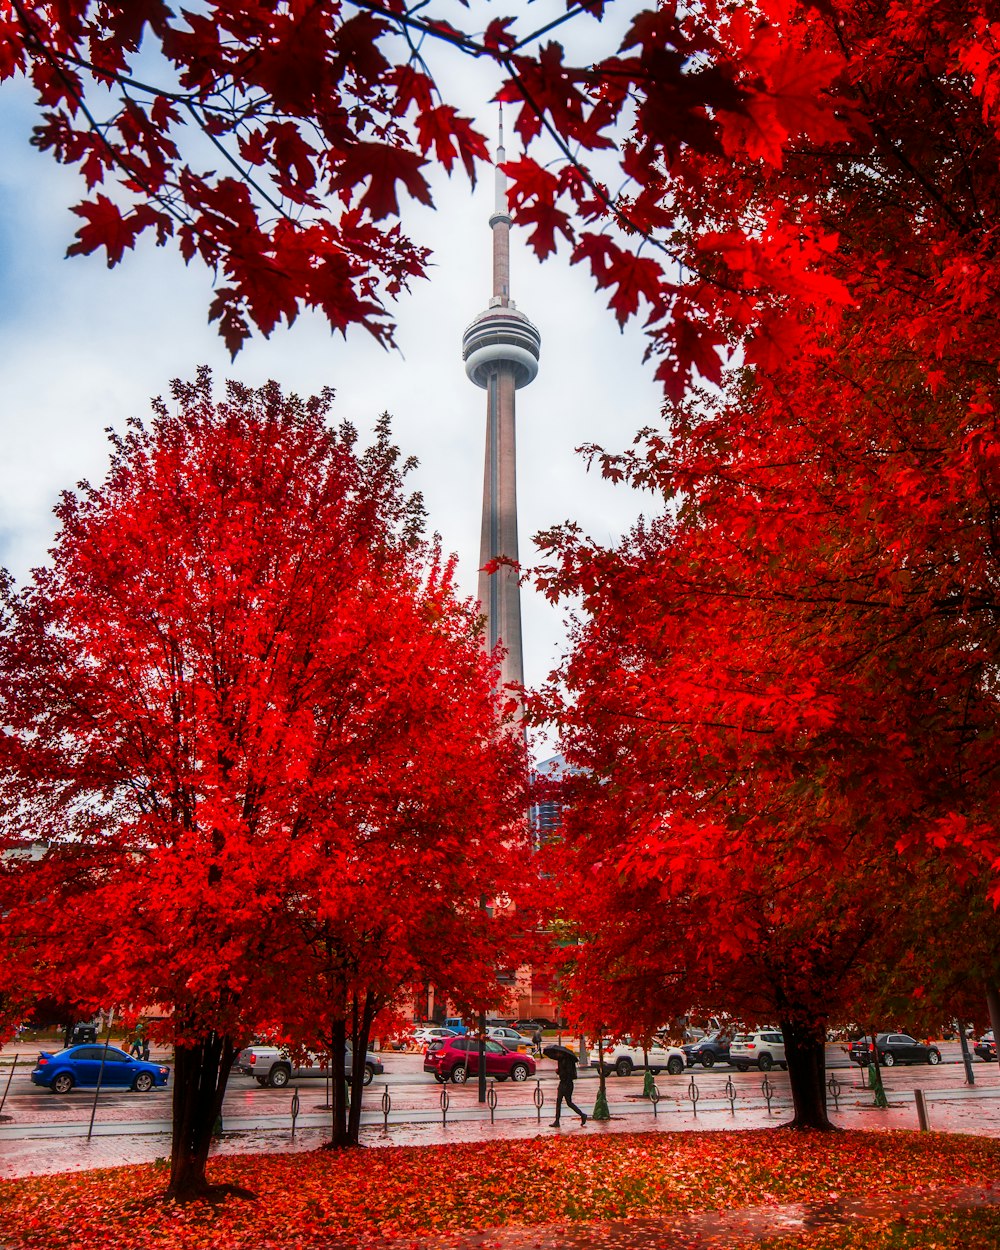 red leaf trees near white concrete tower during daytime